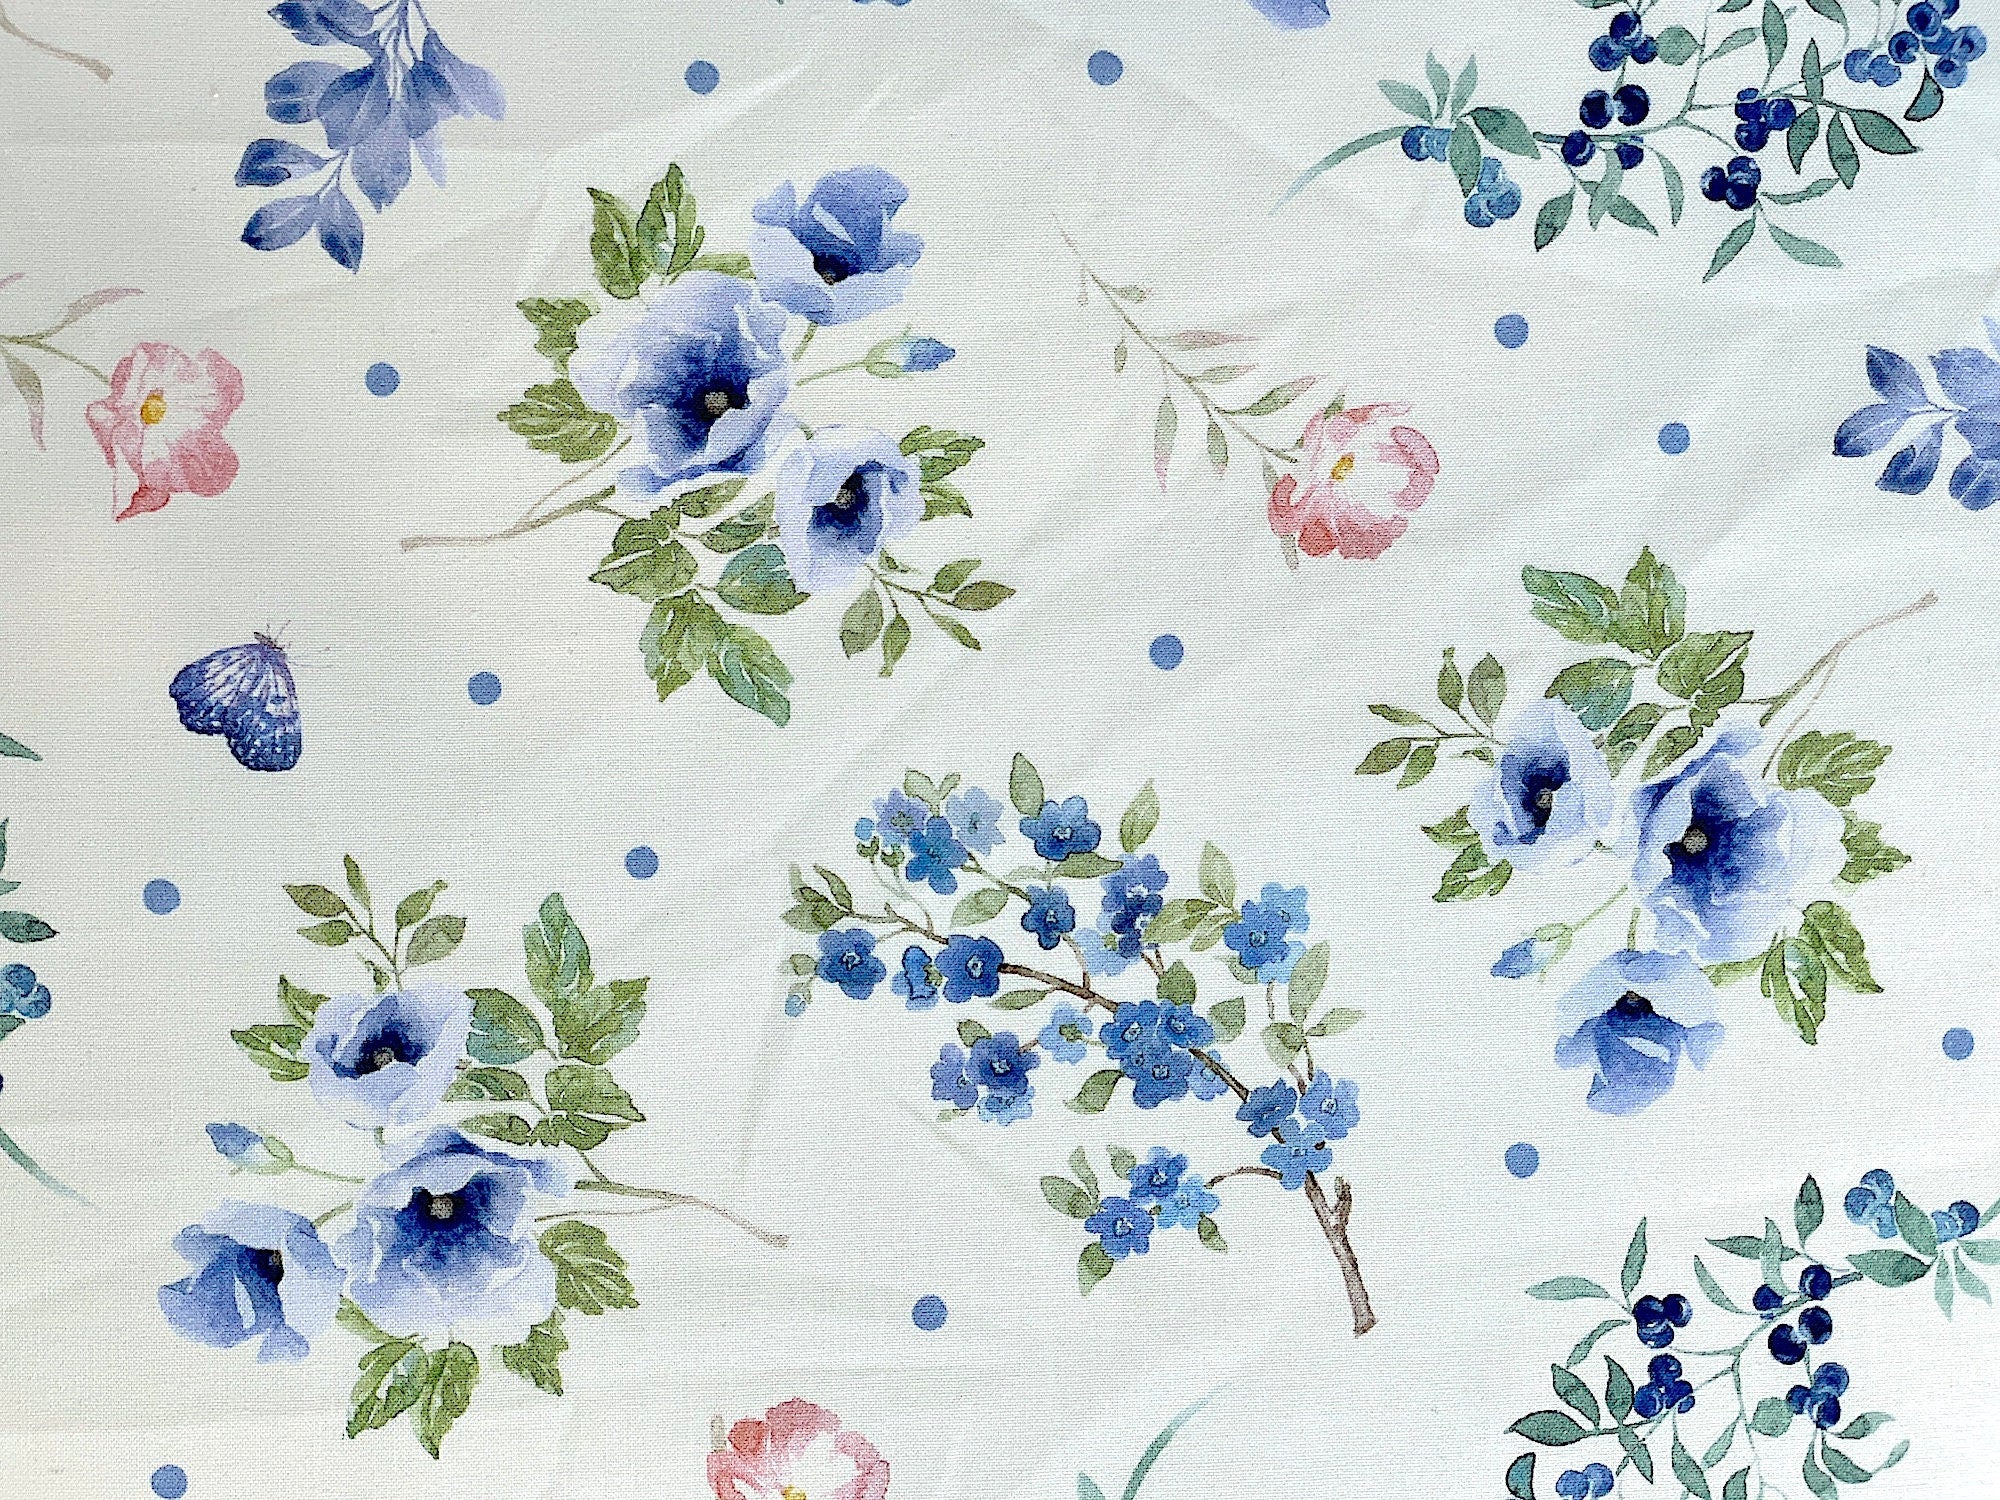 This fabric is part of the Indigo Petals collection by Beth Grove. This white fabric is covered with blue and pink flowers, green leaves and blue butterflies. See my other listings for this design on blue.